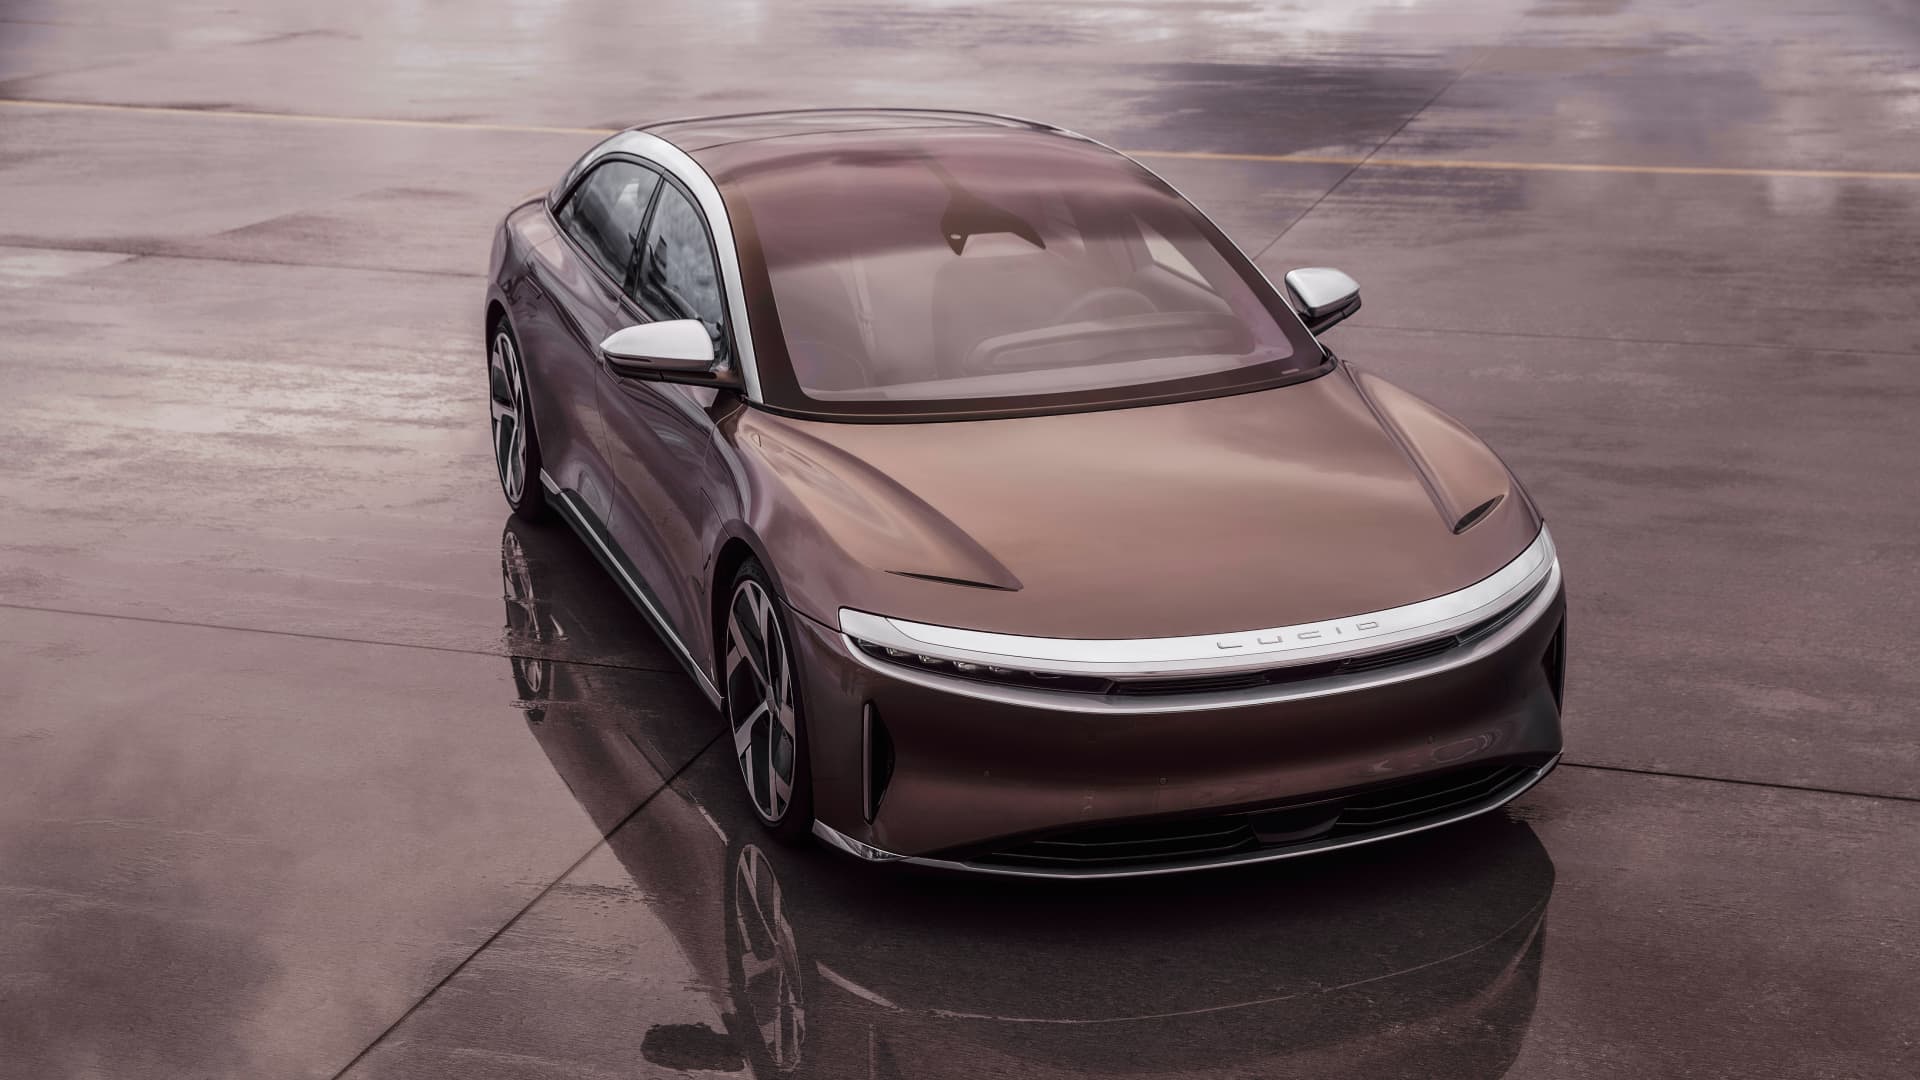 Lucid joins the EV discounting fray with $7,500 ‘credits’ on some of its Air luxury sedans Auto Recent